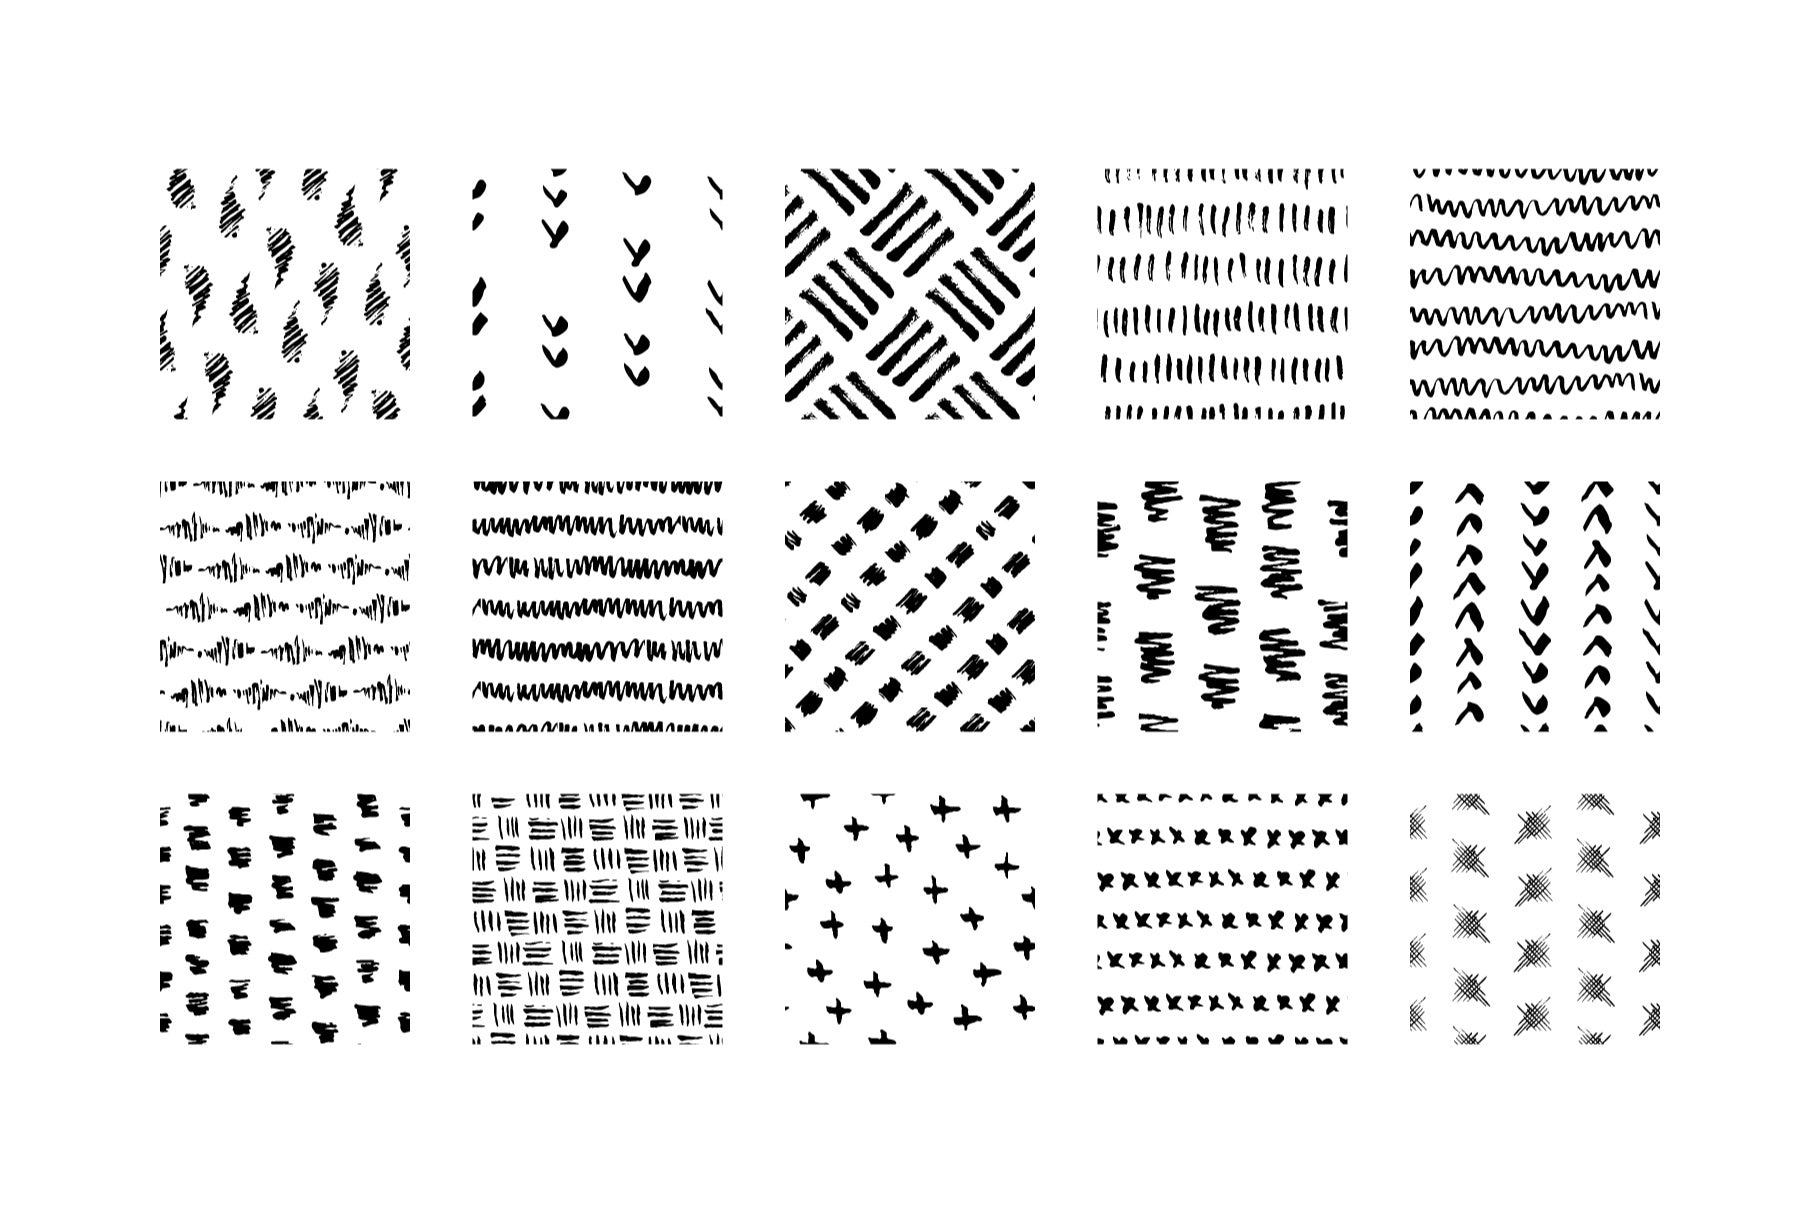 Hand Drawn Patterns 01 Seamless Vector Patterns Pen and Ink Doodle Patterns